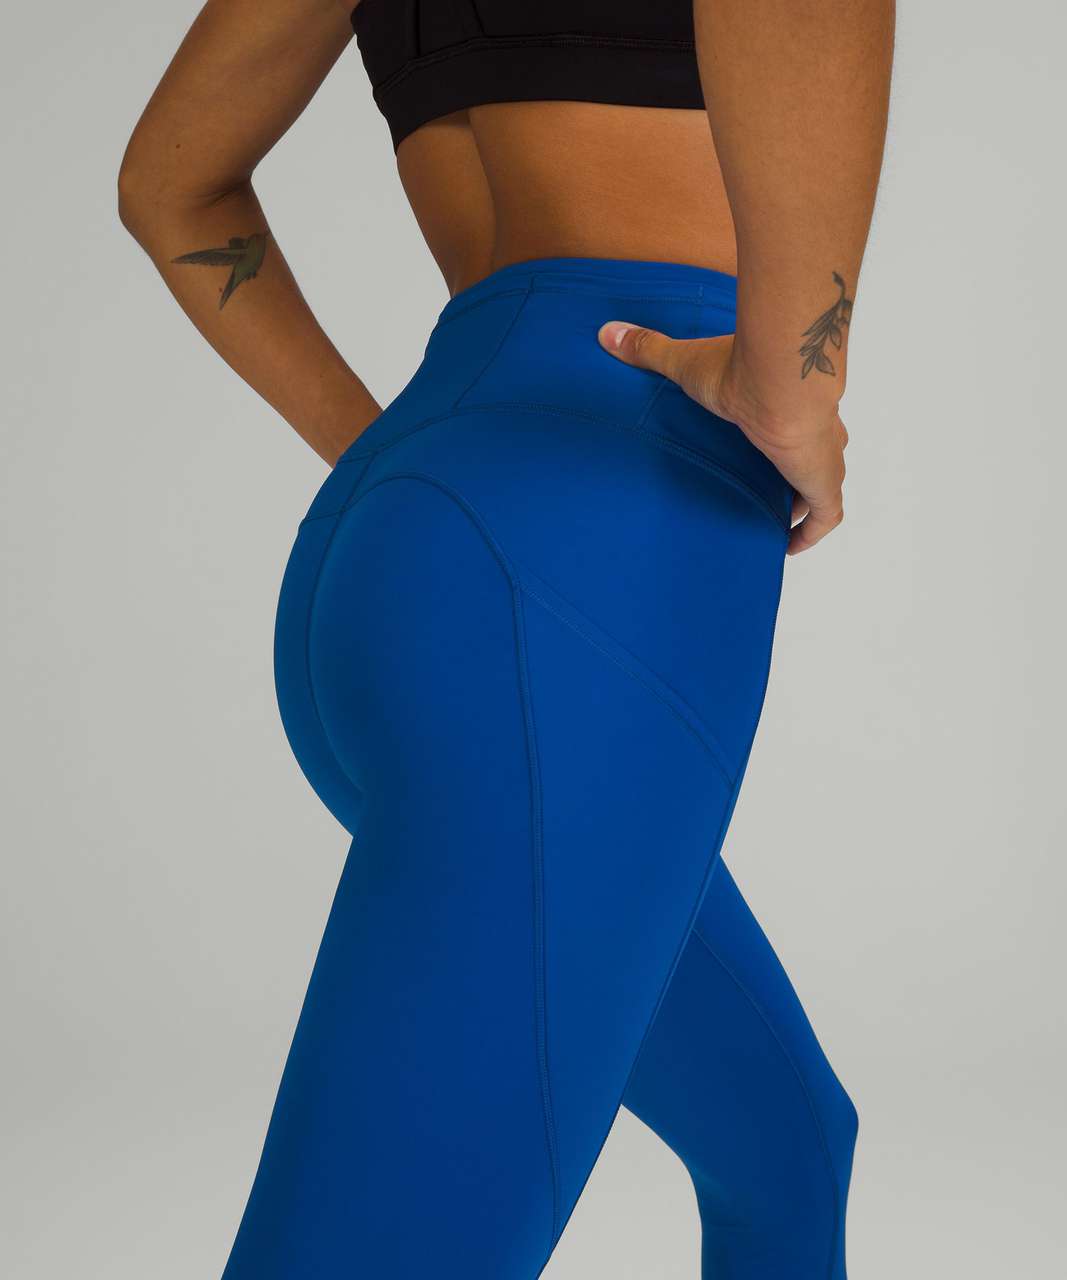 Lululemon Athletica Fast and Free High Rise Crop Leggings 23” in Psychic  Blue